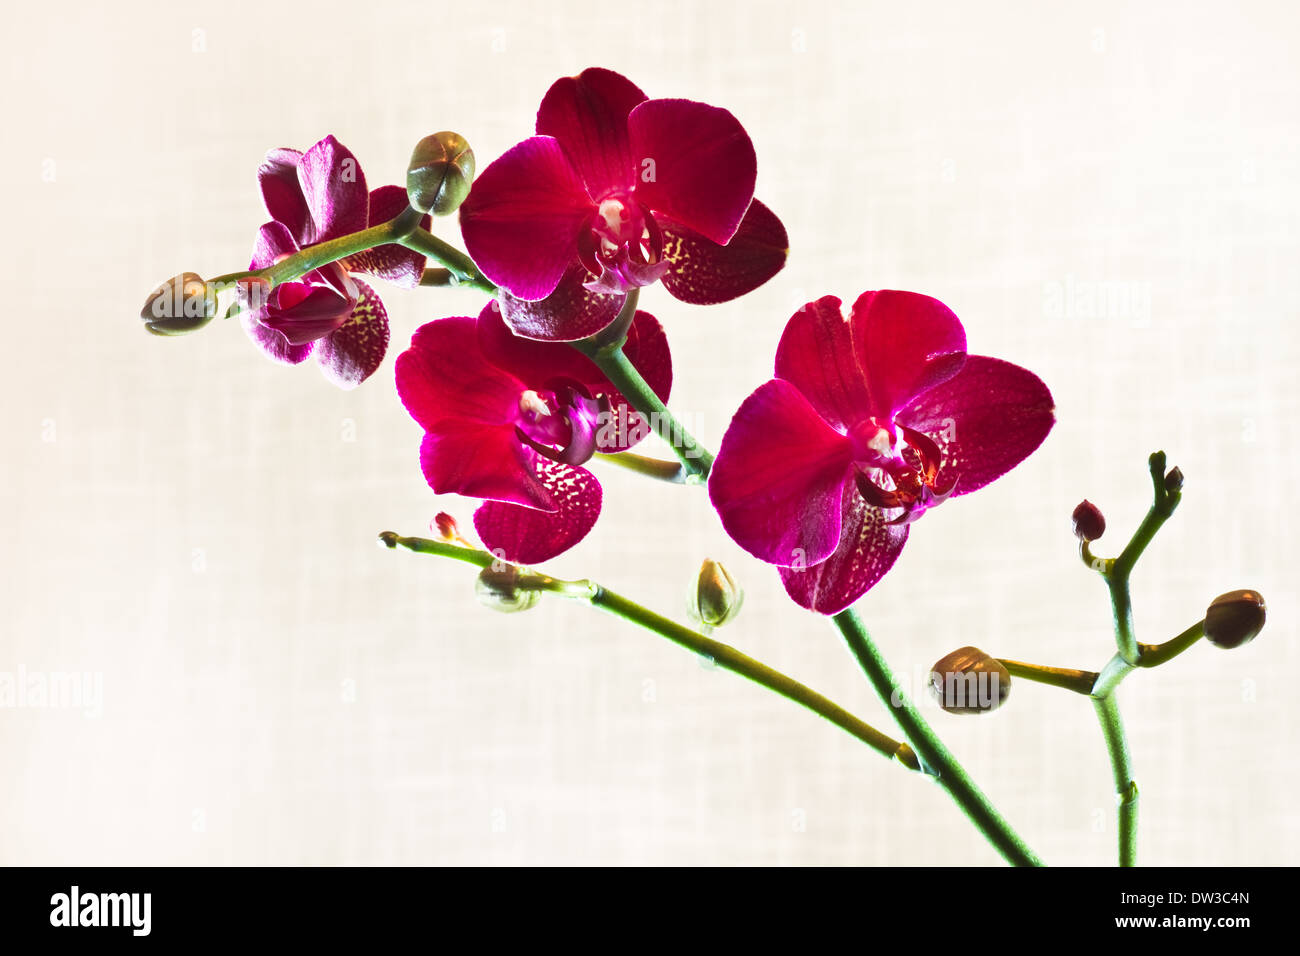 Image of branch dark Red Moth Orchid or Phalaenopsis flowers with out of focus fabric background, which can be used as houseplant Stock Photo